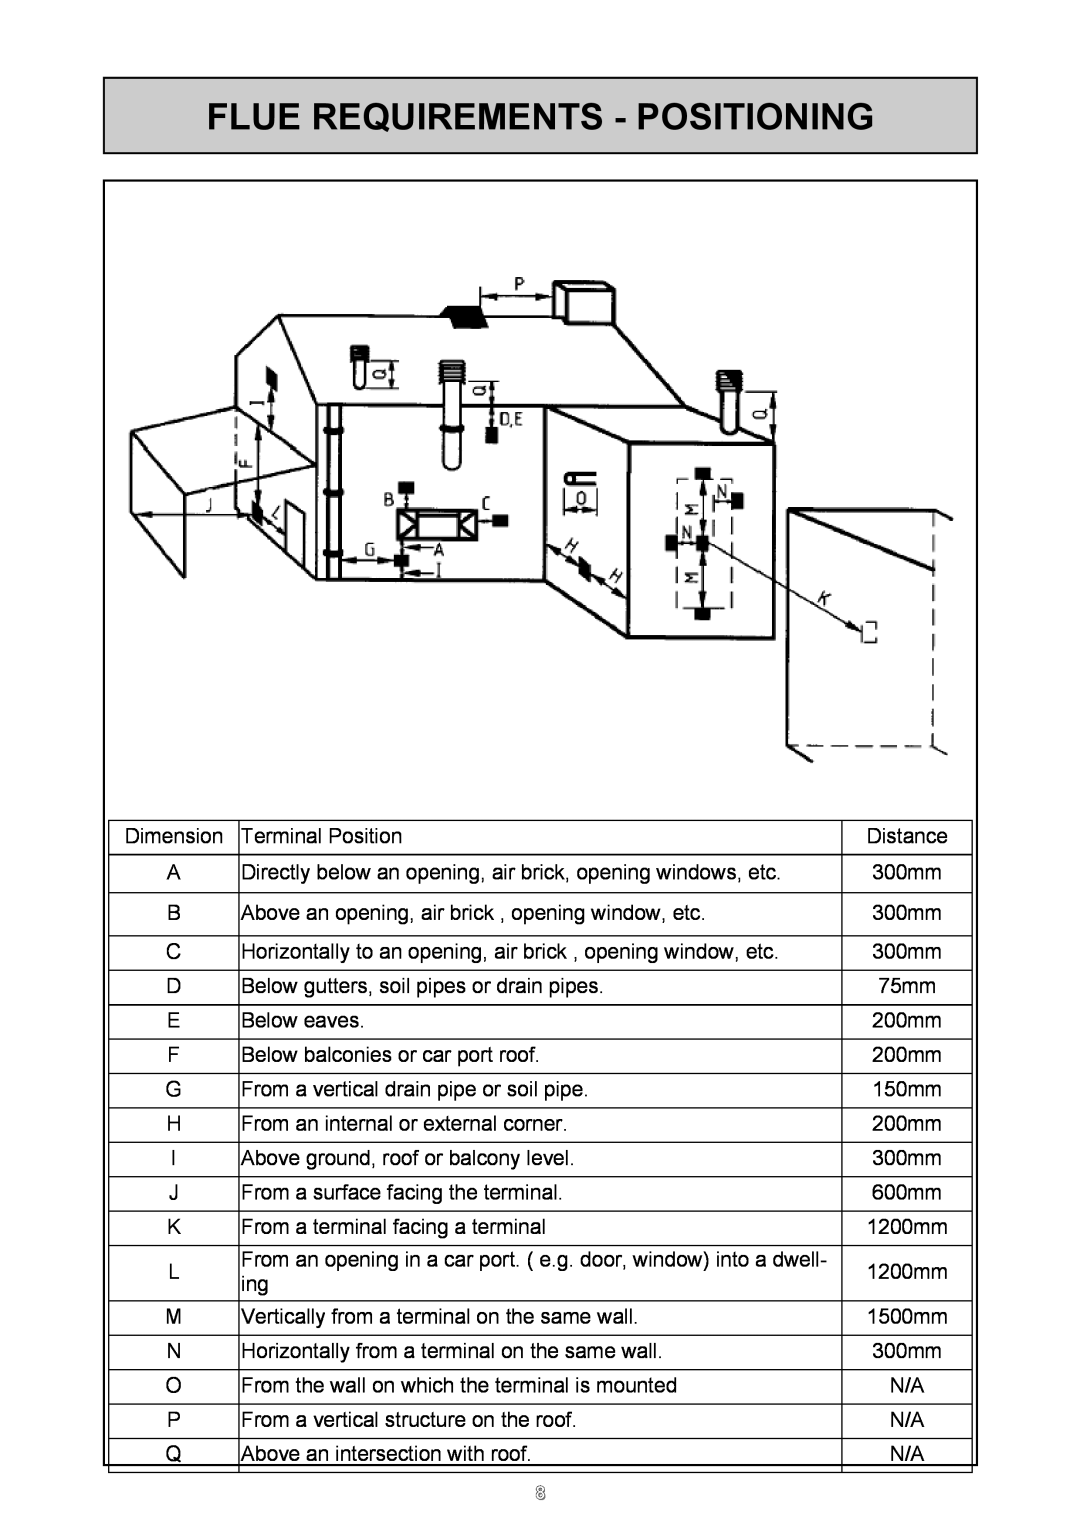 Rinnai 24e user manual Flue Requirements - Positioning 